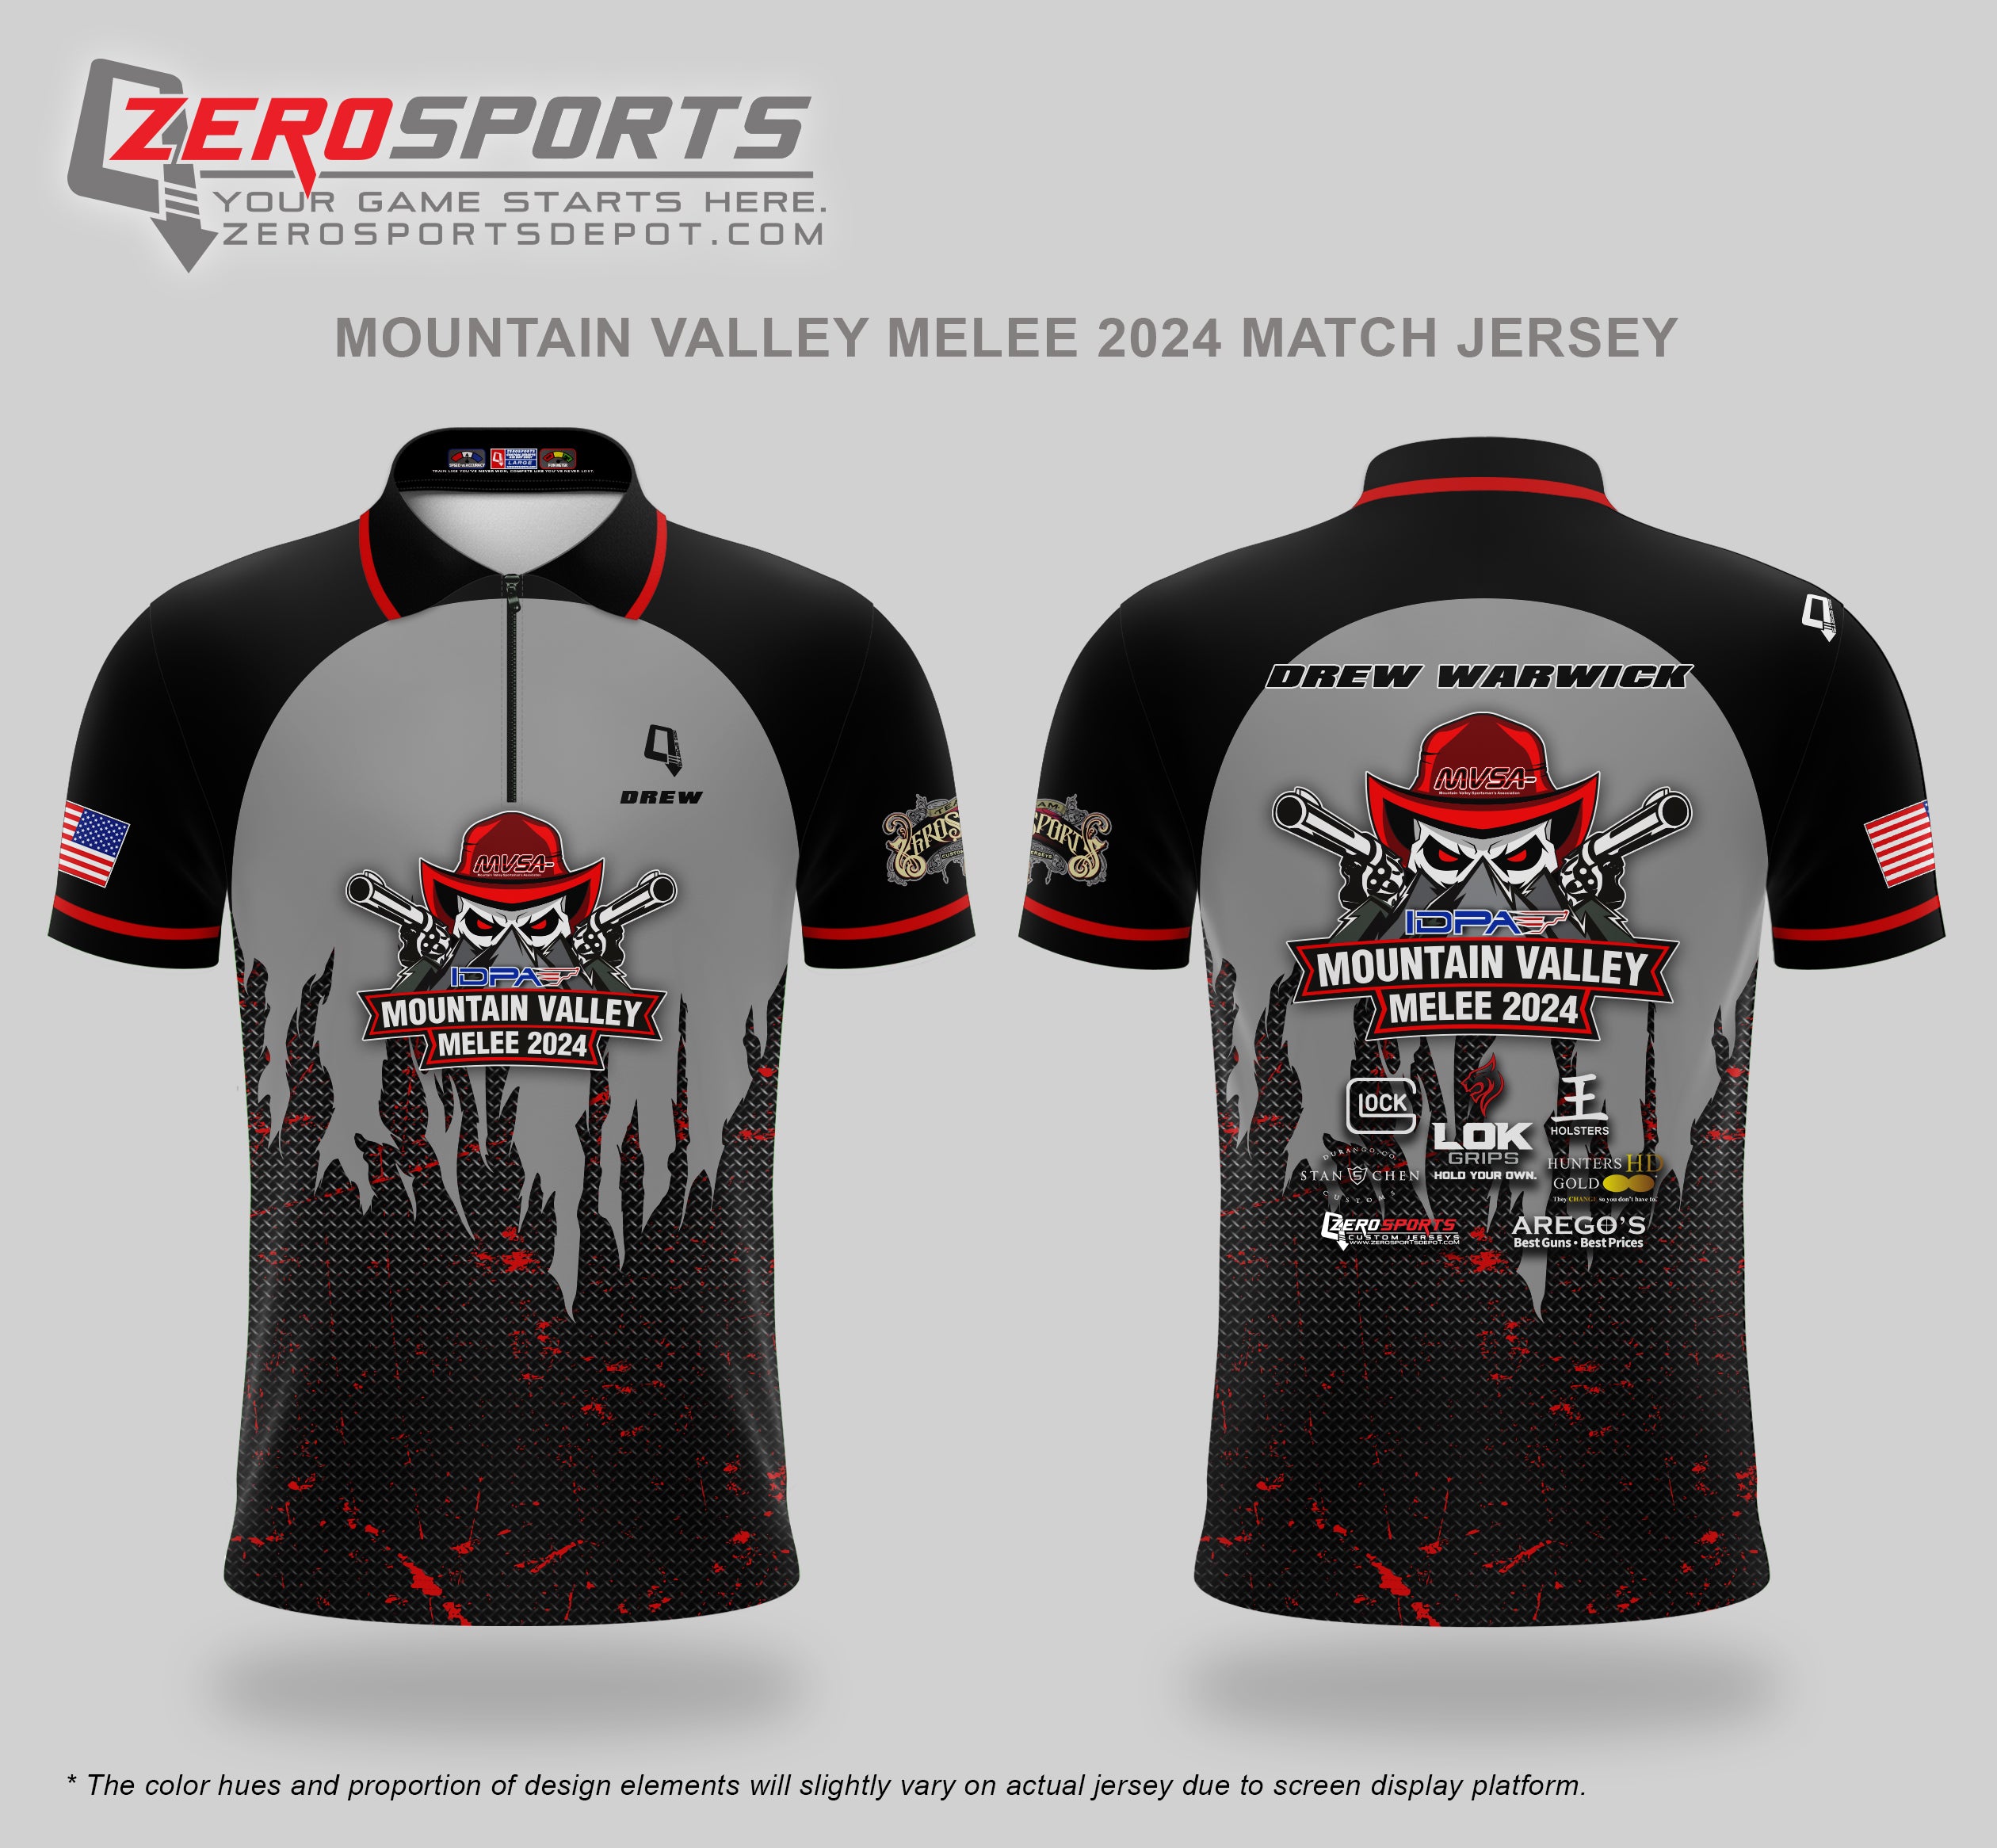 Mountain Valley Melee 2024 Match Jersey